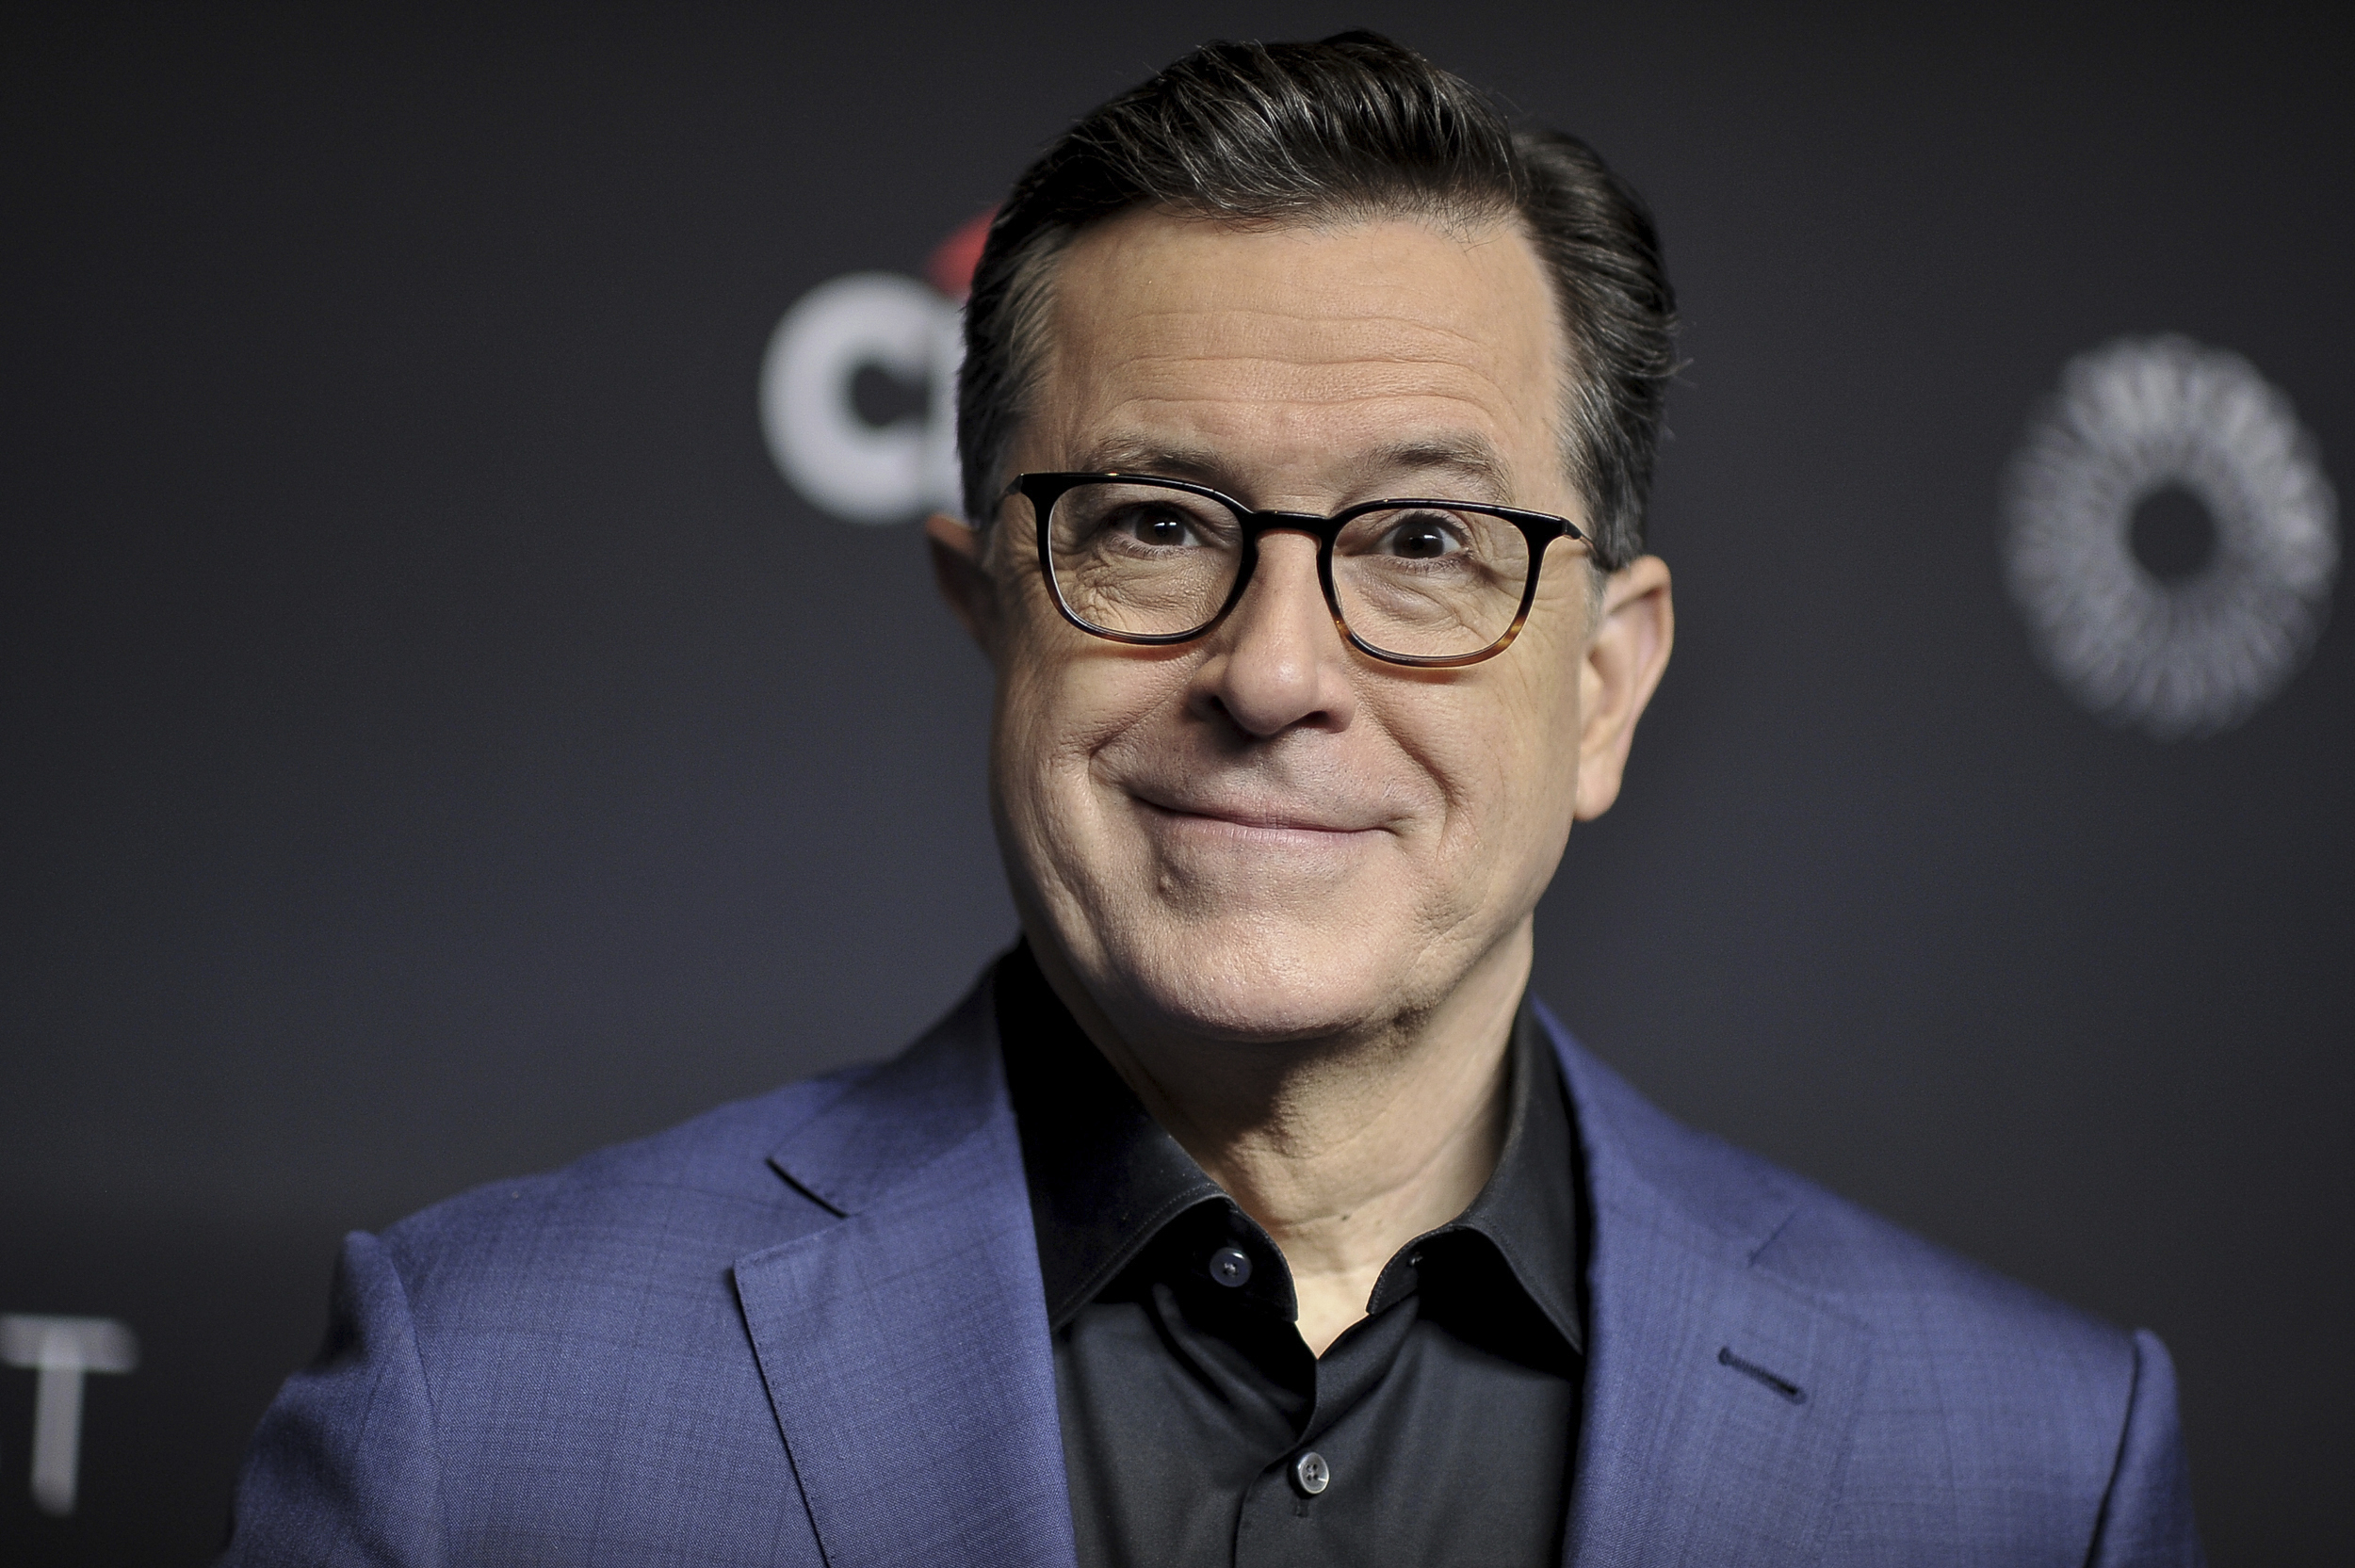 FILE - Stephen Colbert attends the 36th Annual PaleyFest "An Evening with Stephen Colbert" in Los Angeles on March 16, 2019. Colbert says that his staff members arrested at a congressional office building last week were guilty of ‘first-degree puppetry.’ His ‘Late Show’ monologue Monday was his first time addressing the Thursday incident. U.S. Capitol Police detained comics including the voice of Triumph the Insult Comic Dog. (Photo by Richard Shotwell/Invision/AP, File)